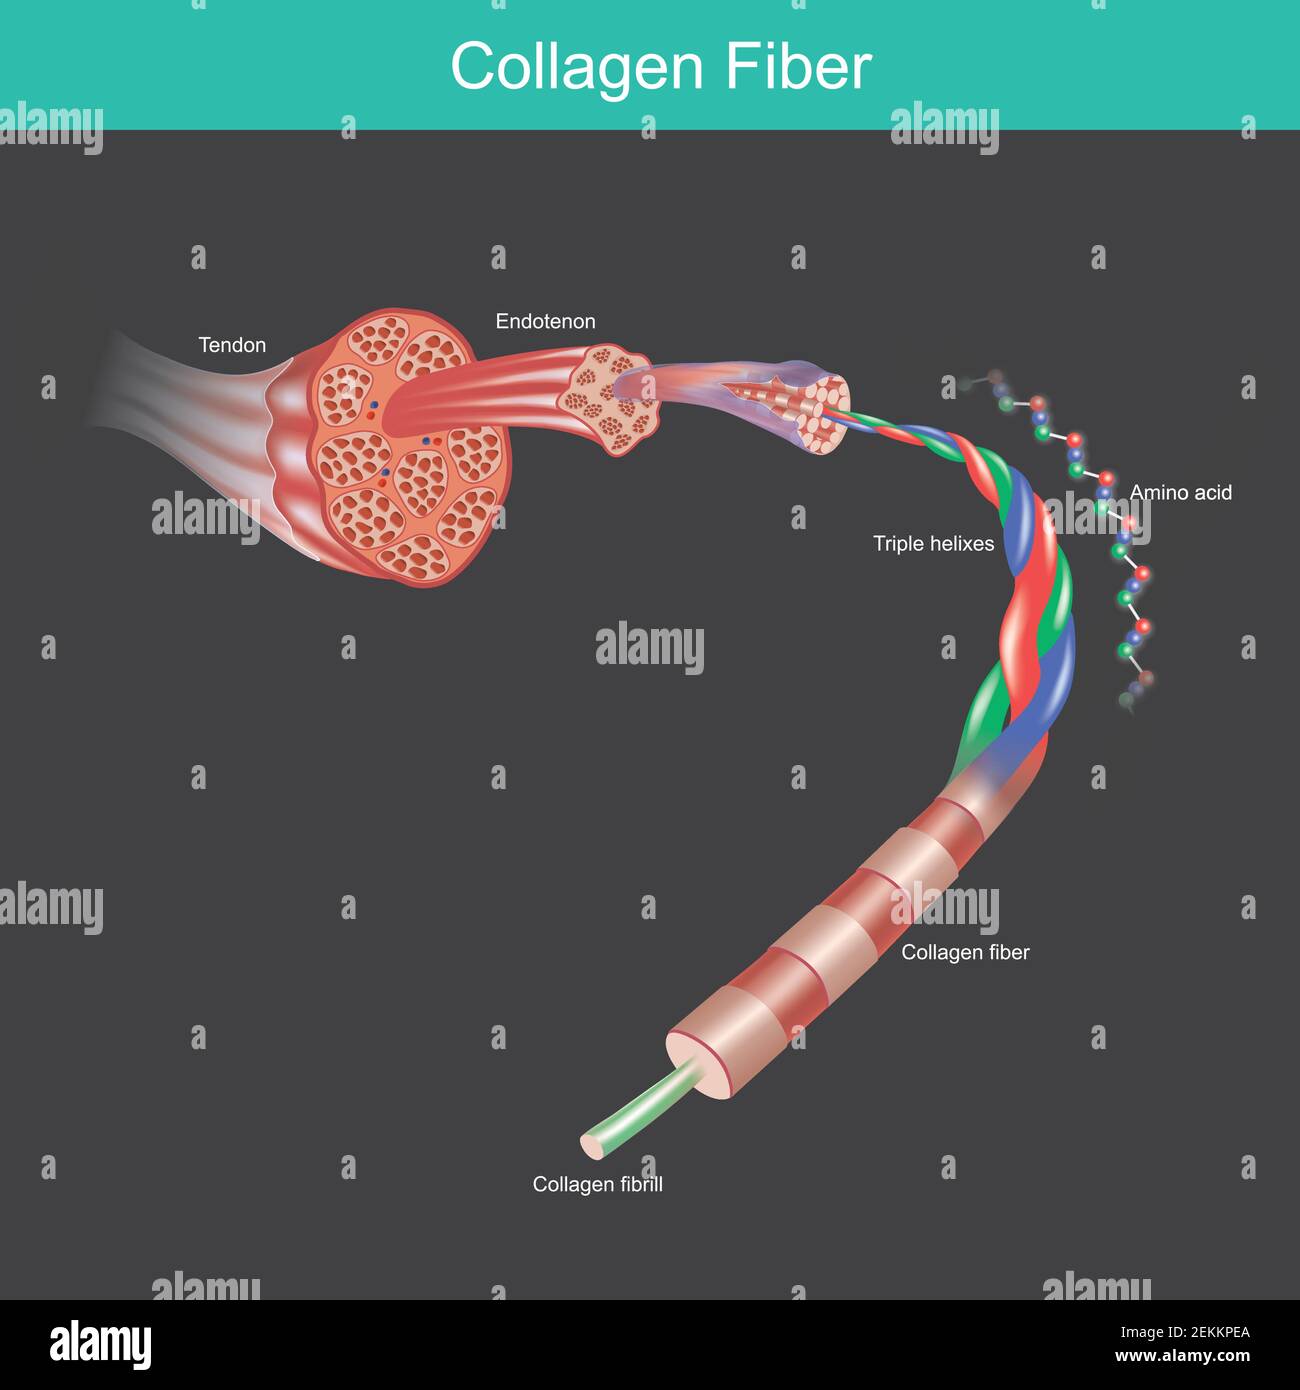 collagen fibre. illustration for commercial about the collagen molecule and amino acid  that affect tissues and muscles of human. Stock Vector